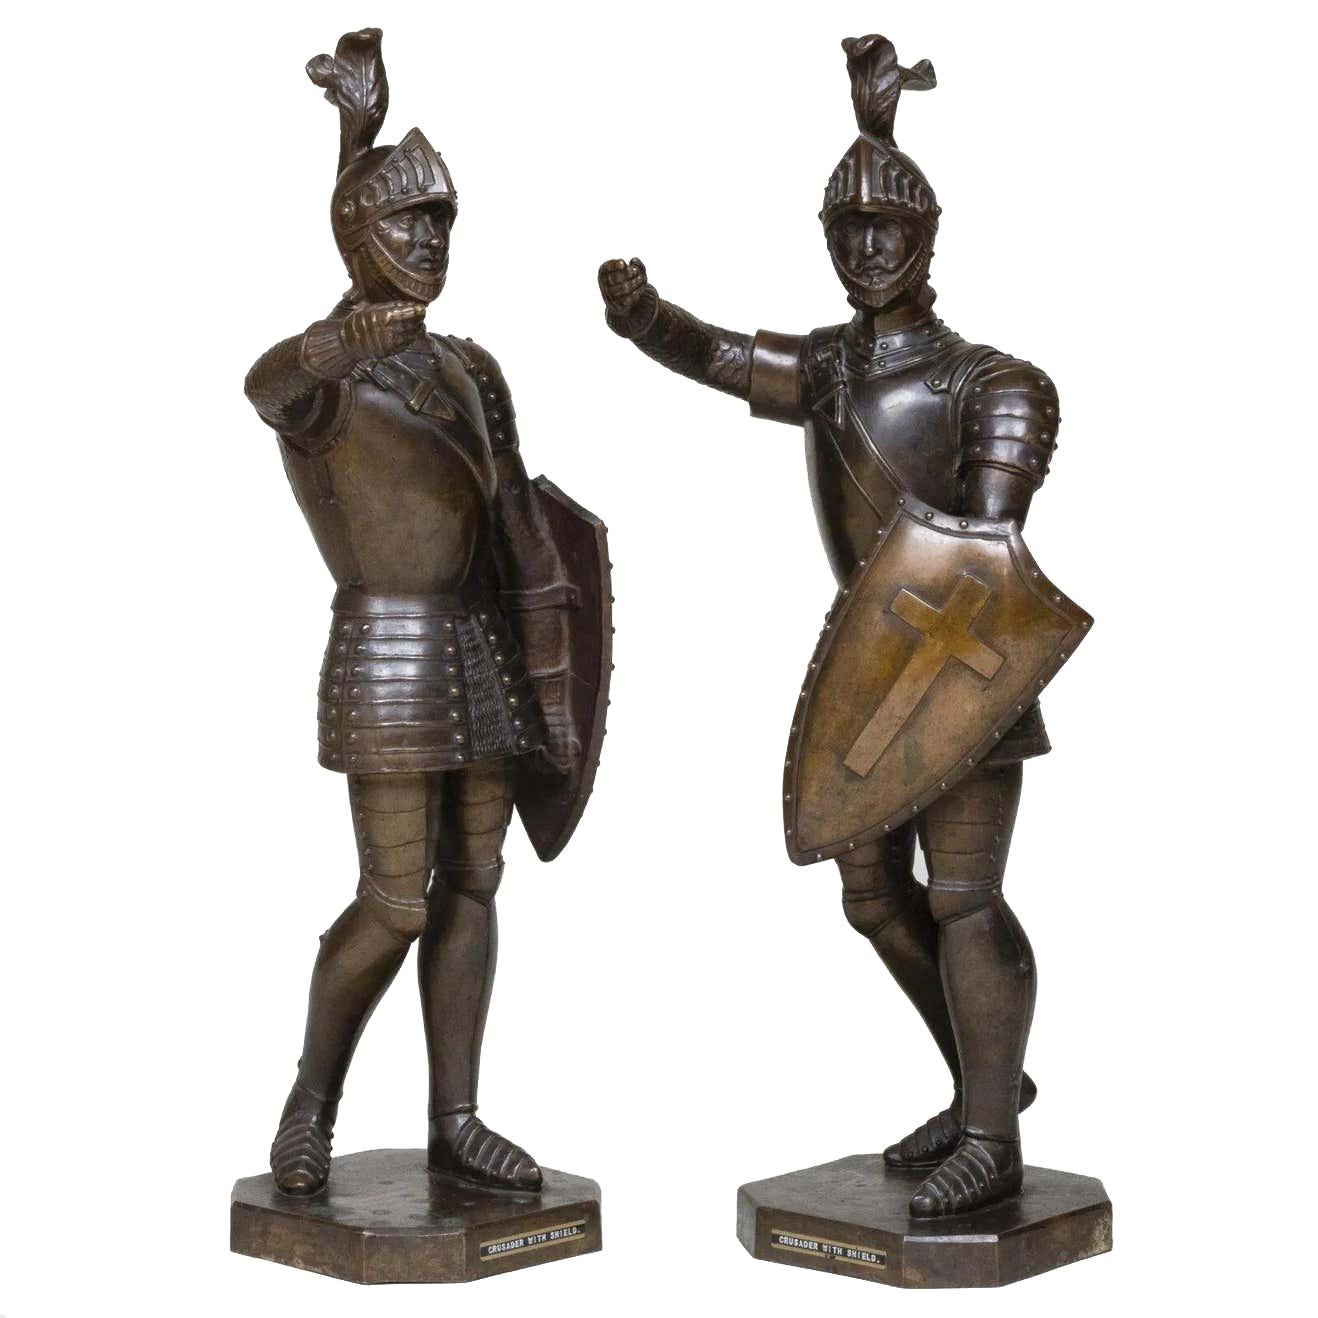 Unknown Figurative Sculpture - A Pair Of Patinated Bronze Medieval Crusader Sculptures with Armor and Shields